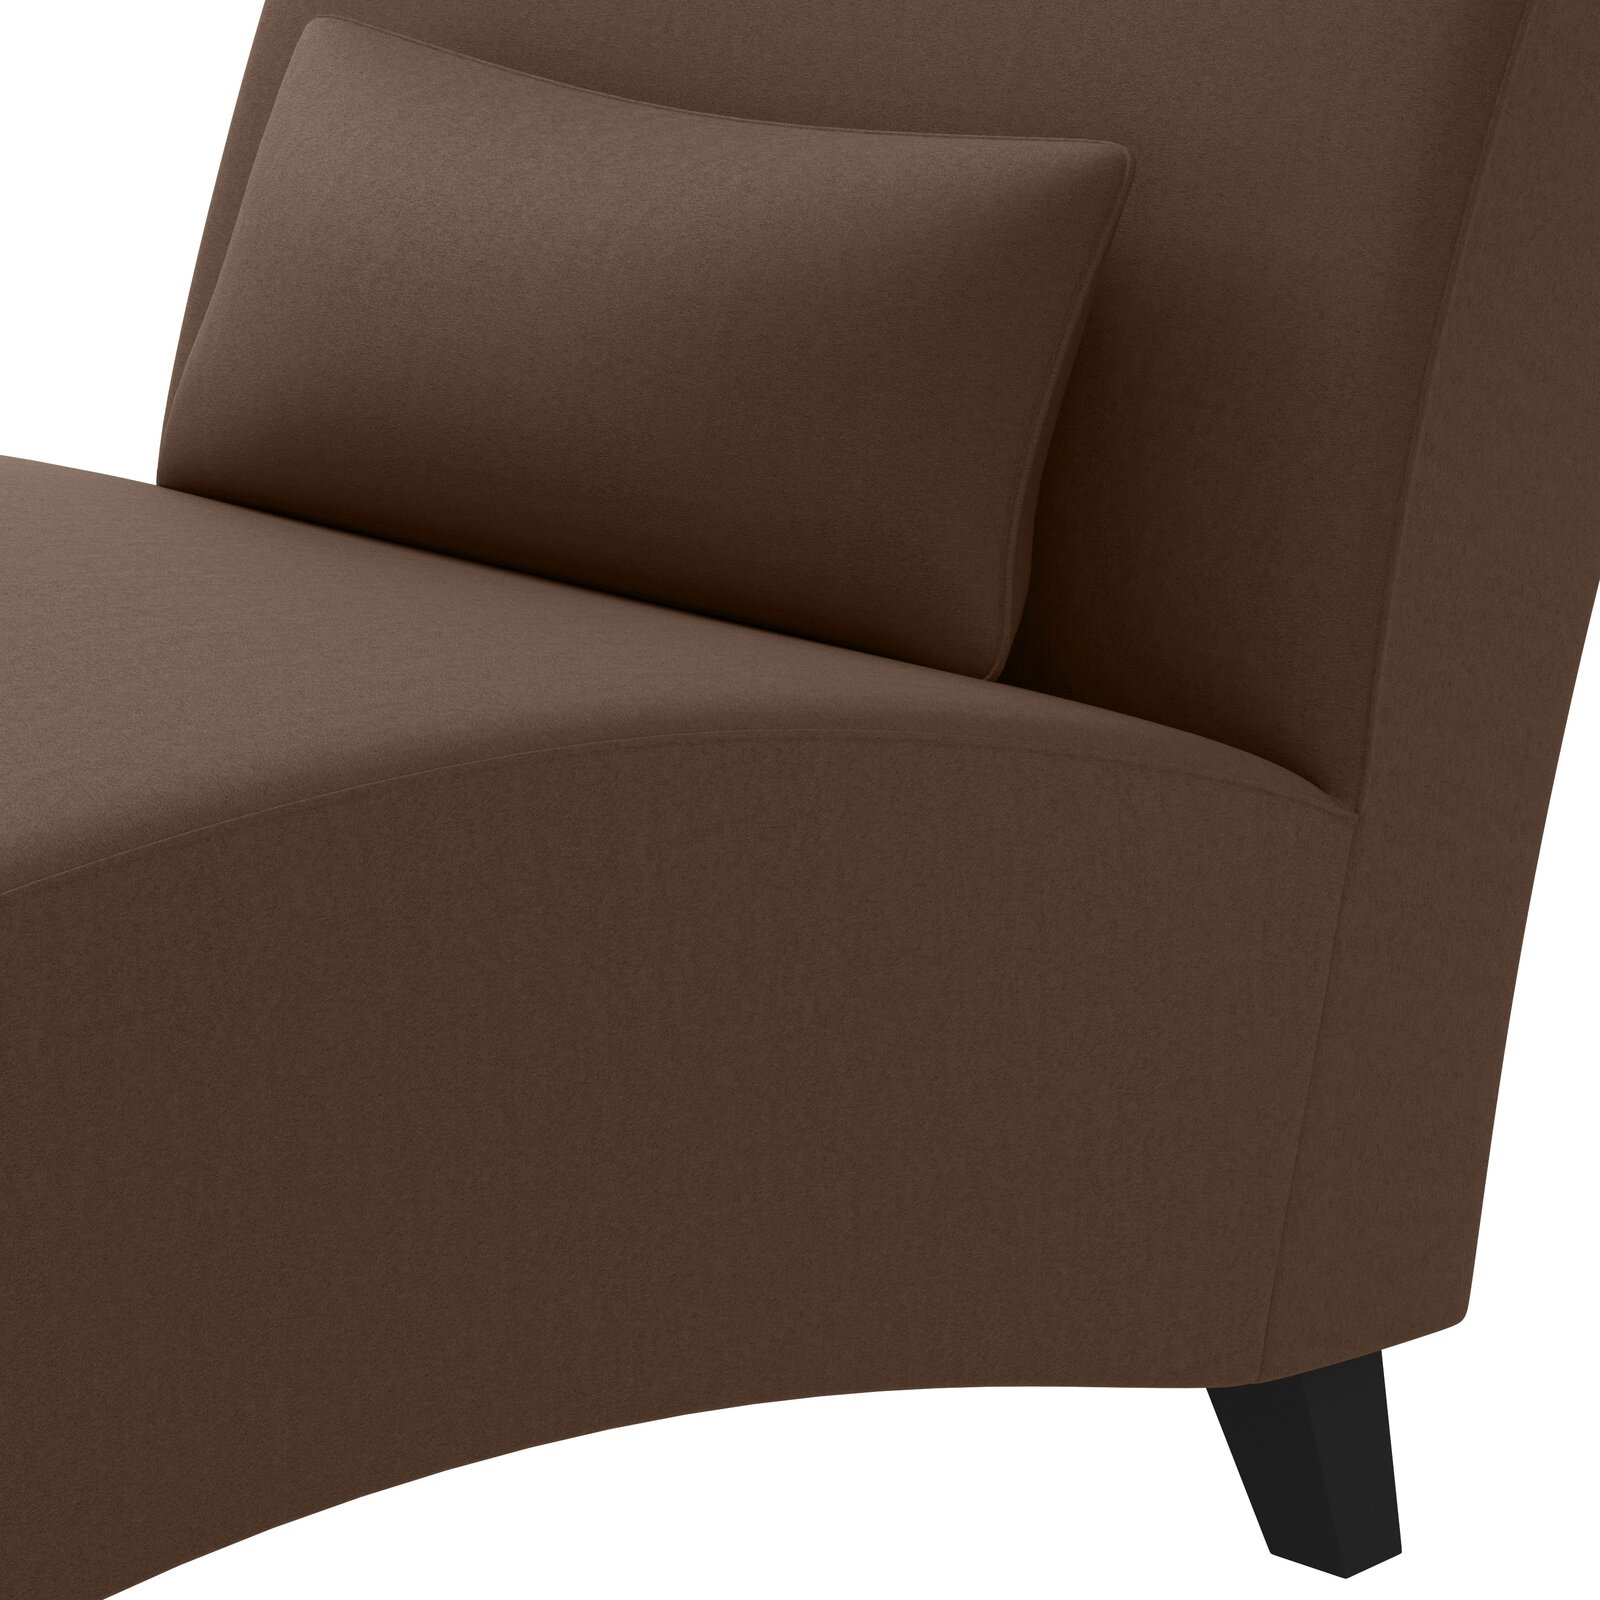 Braemar Armless Chaise Lounge, This piece has a sinuous spring construction with foam filling, so it provides a firmer seat, Solid Wood - image 5 of 7